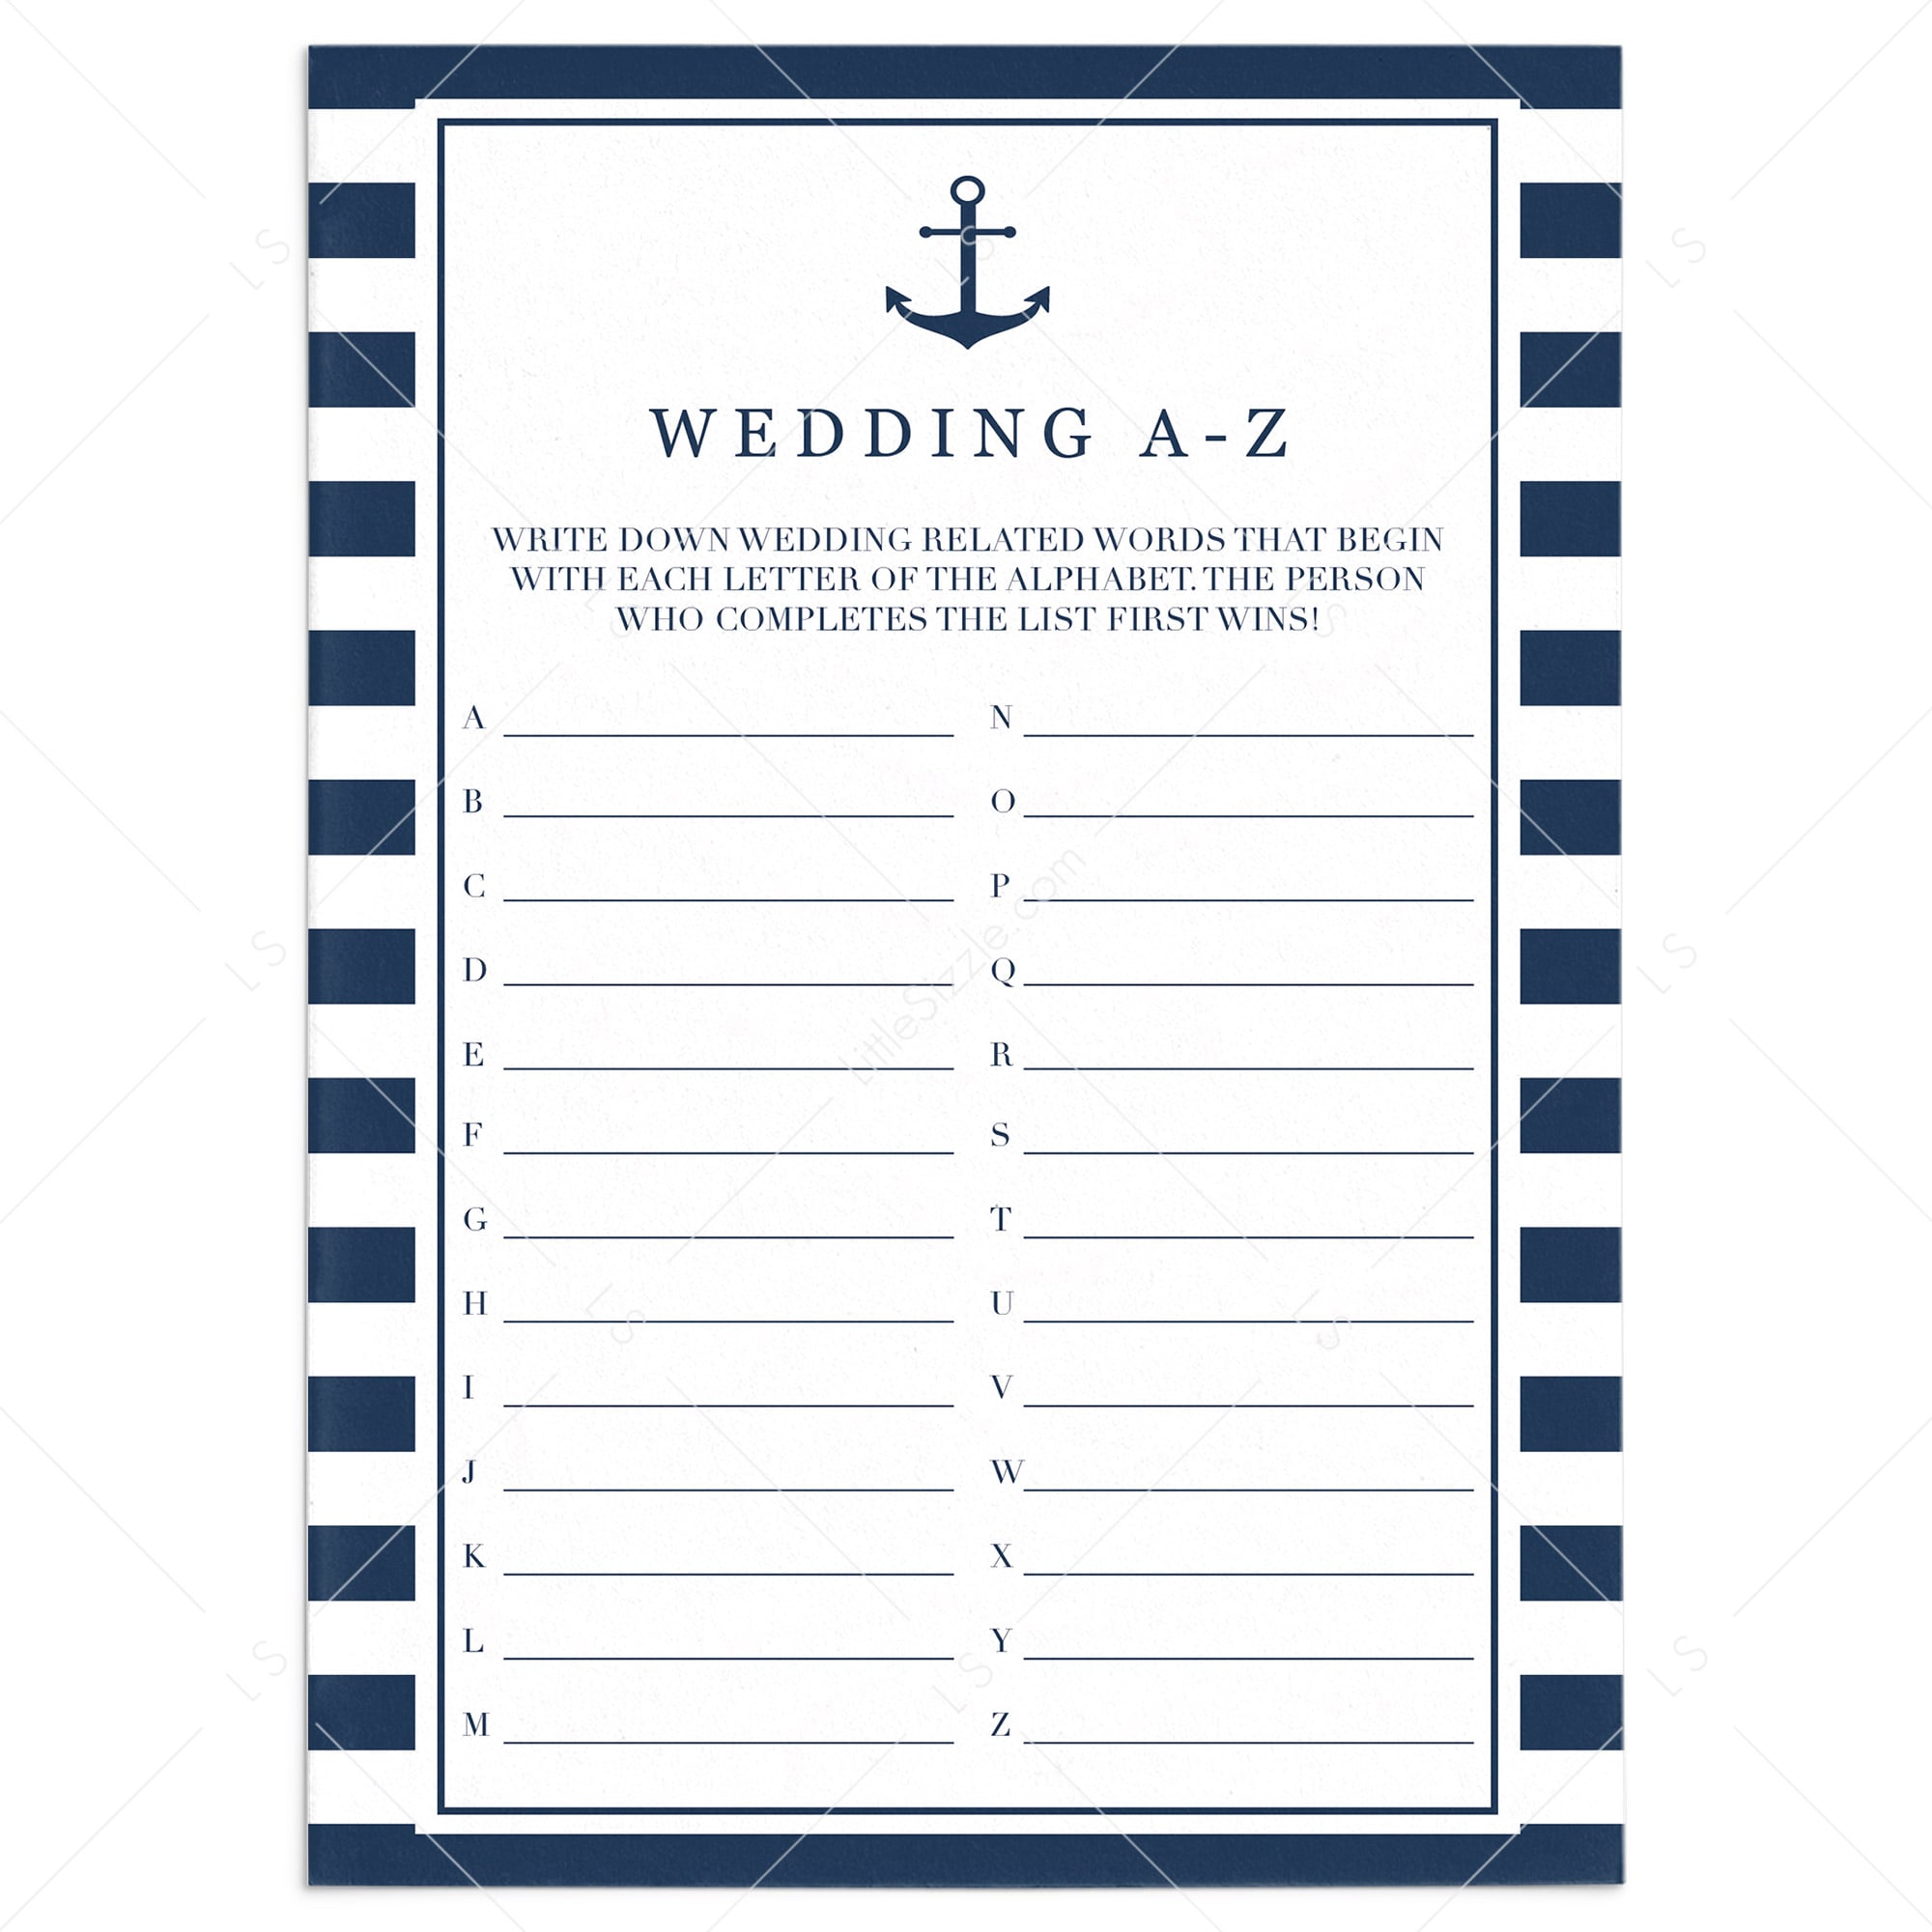 guess the wedding related words a-z game by LittleSizzle